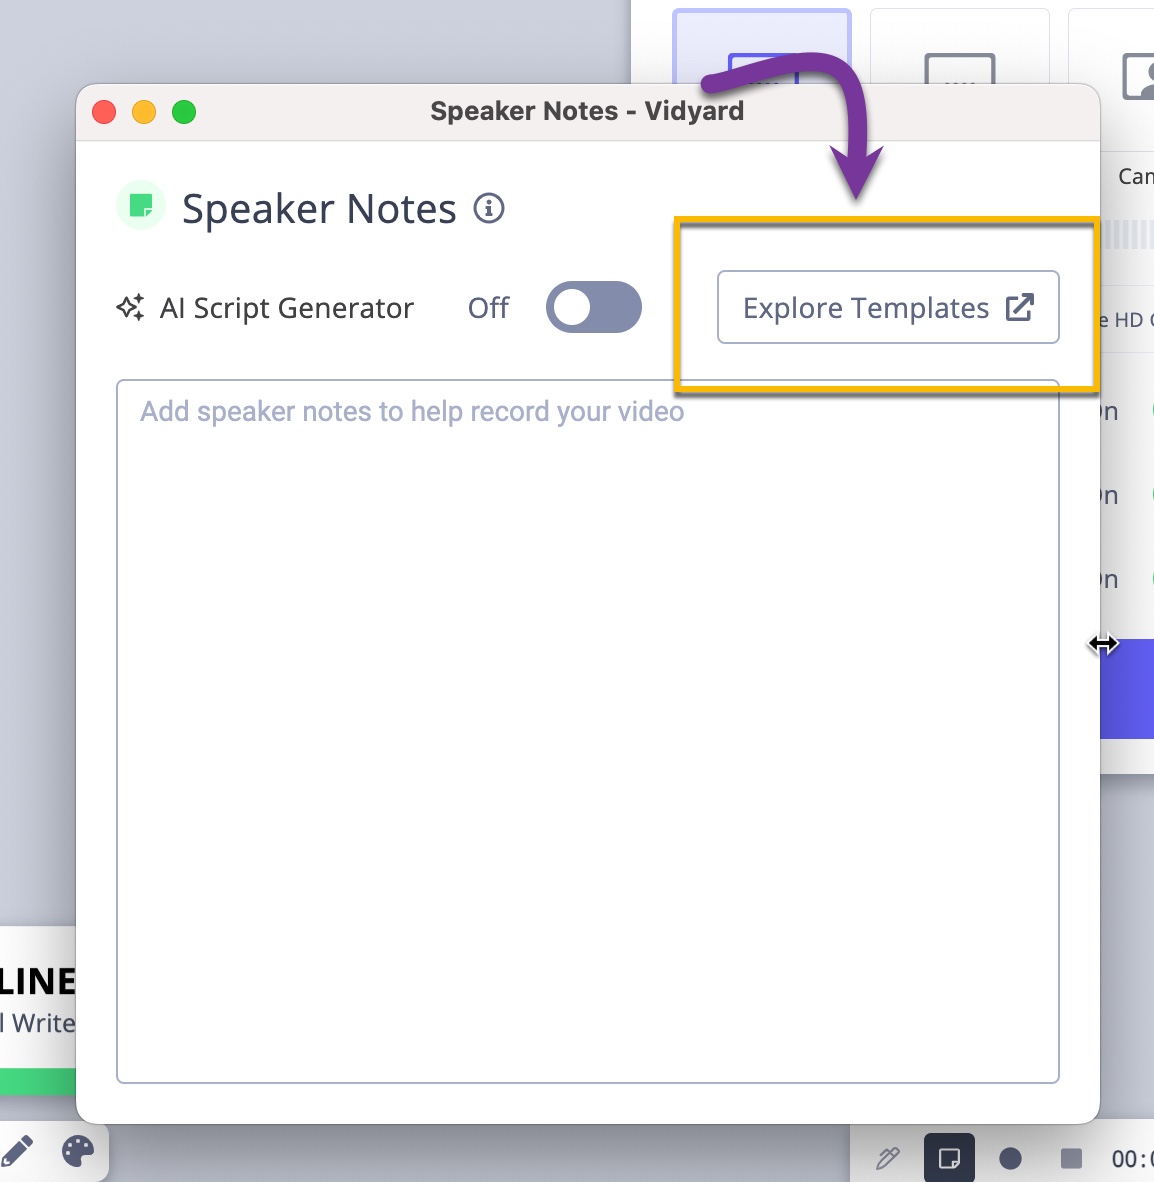 Screen recording speaker notes with option to explore templates highlighted